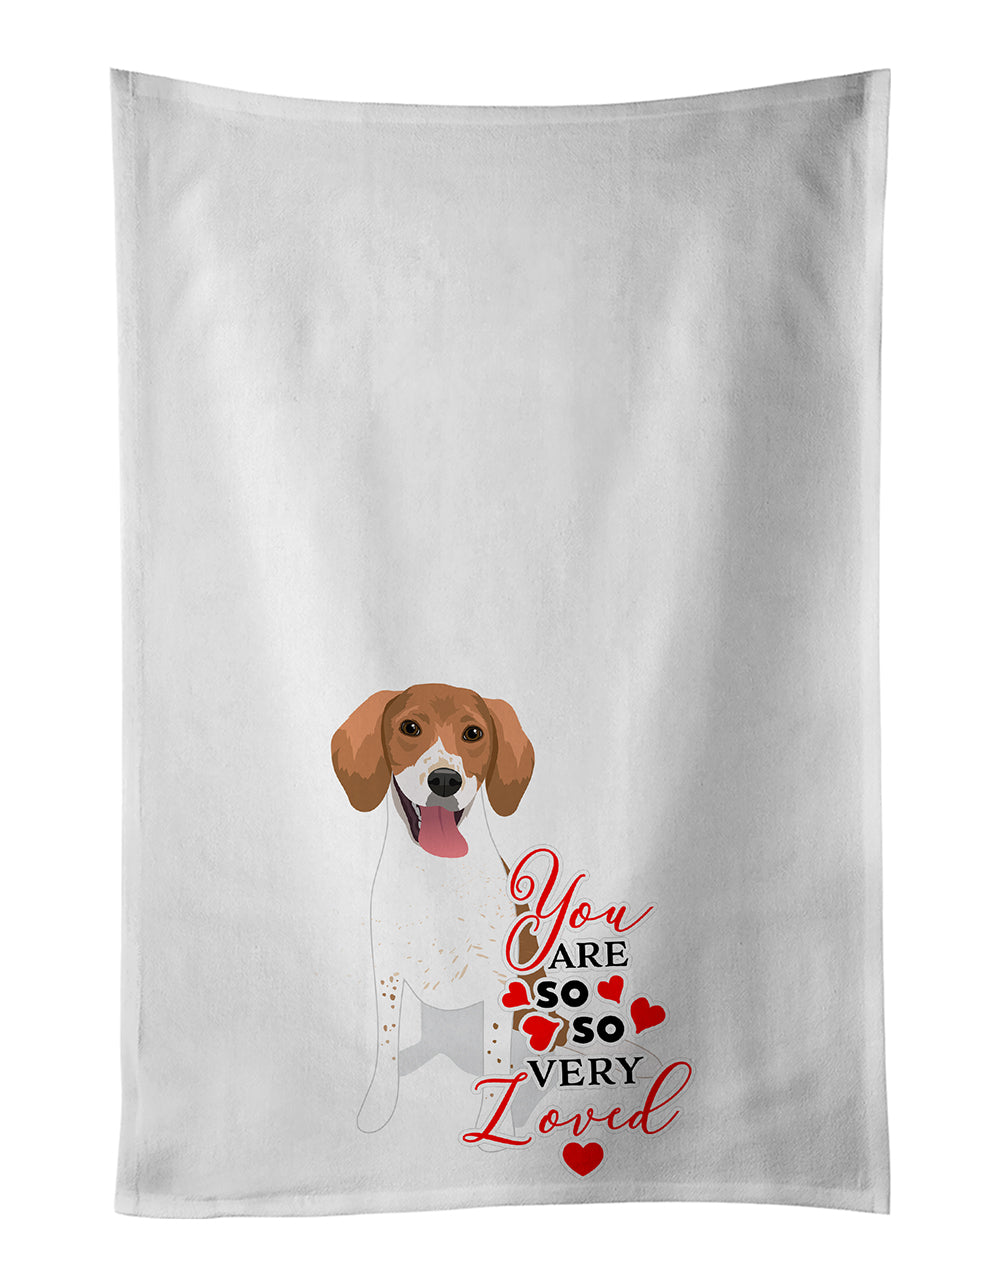 Buy this Beagle Red and White Red Ticked #2 so Loved White Kitchen Towel Set of 2